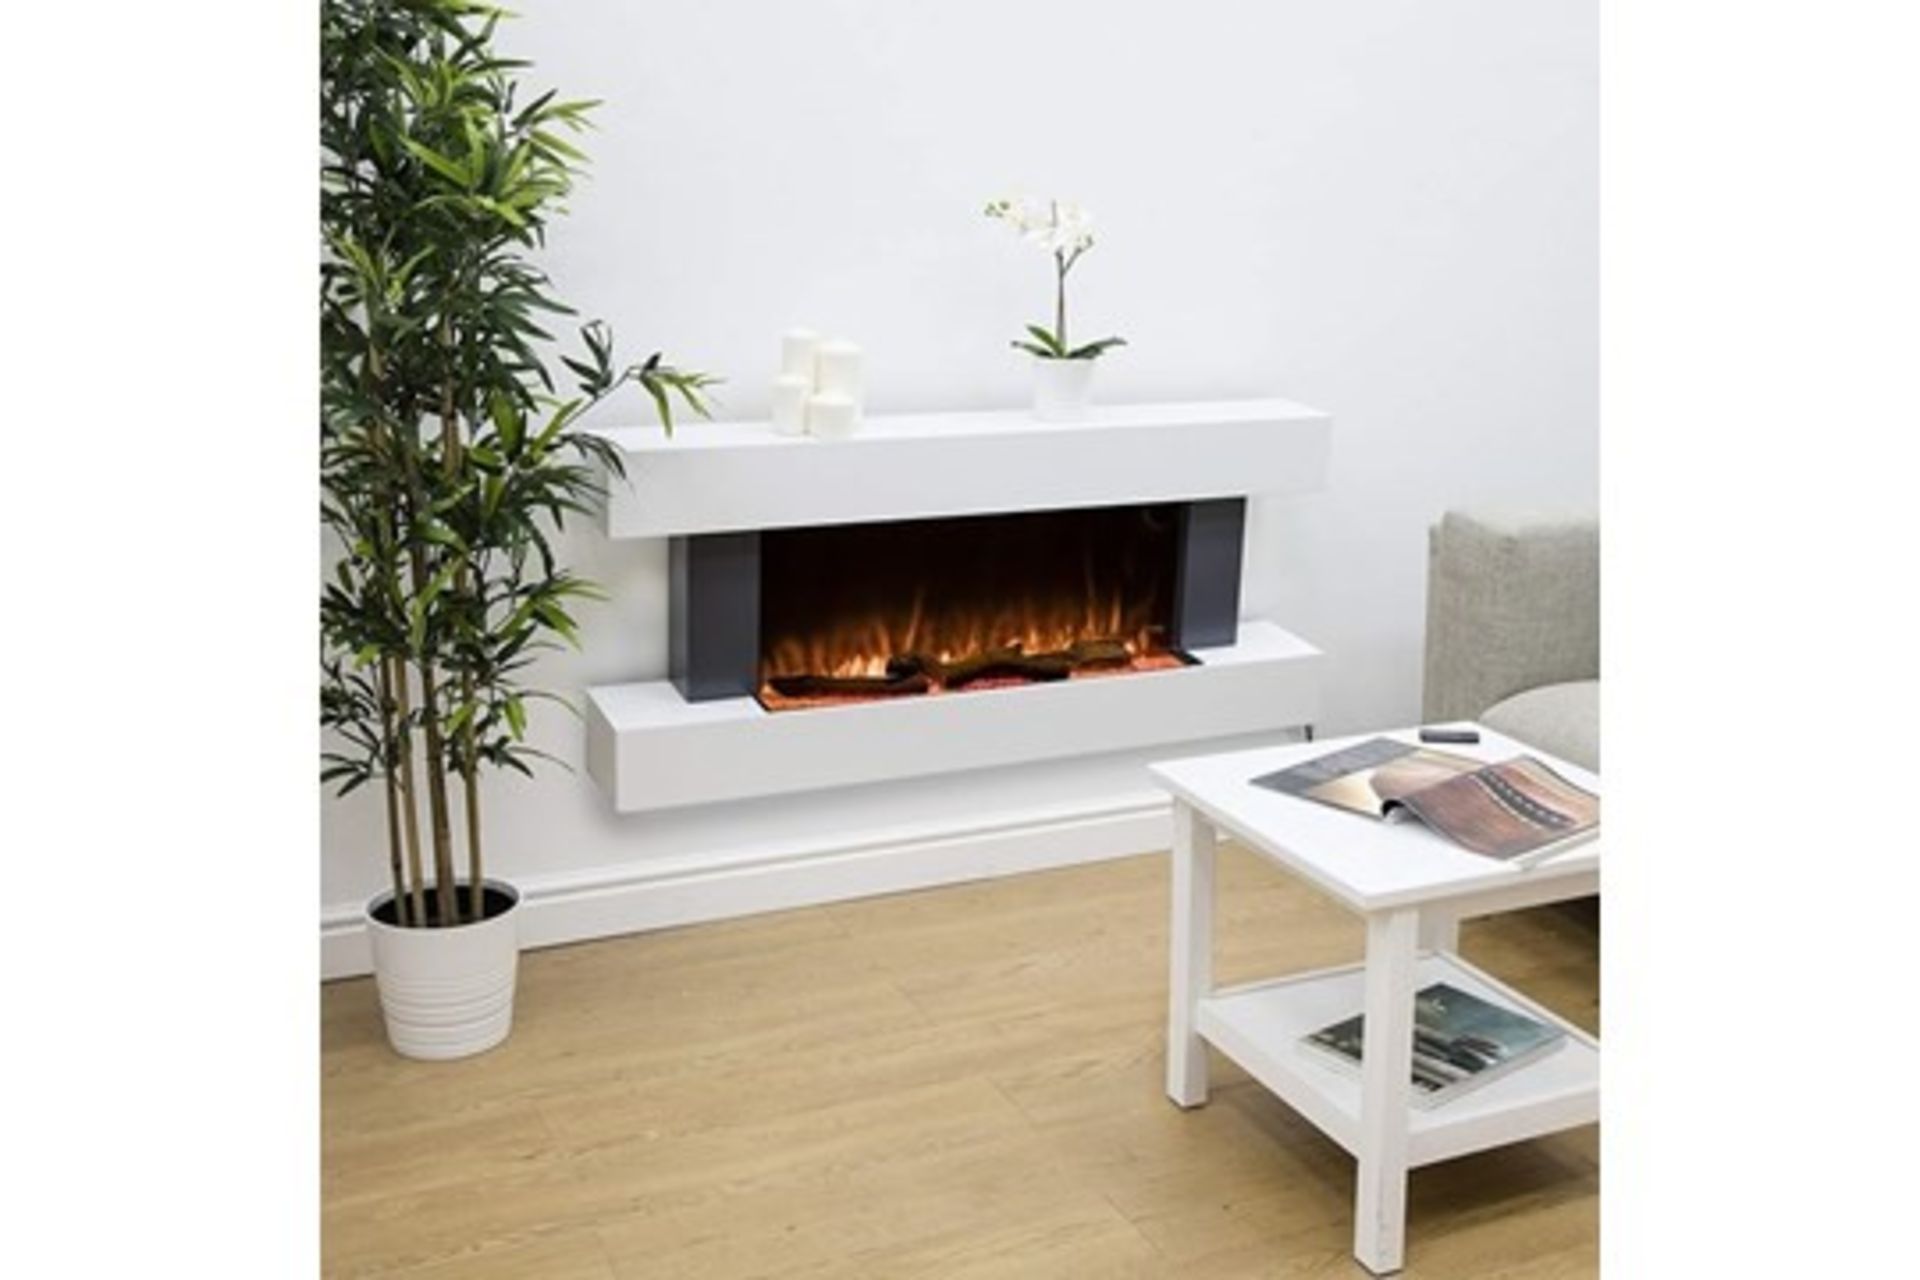 Pallet of 5x 2000w Wall Mounted surround electric fire place suite with LED flame effect, new and